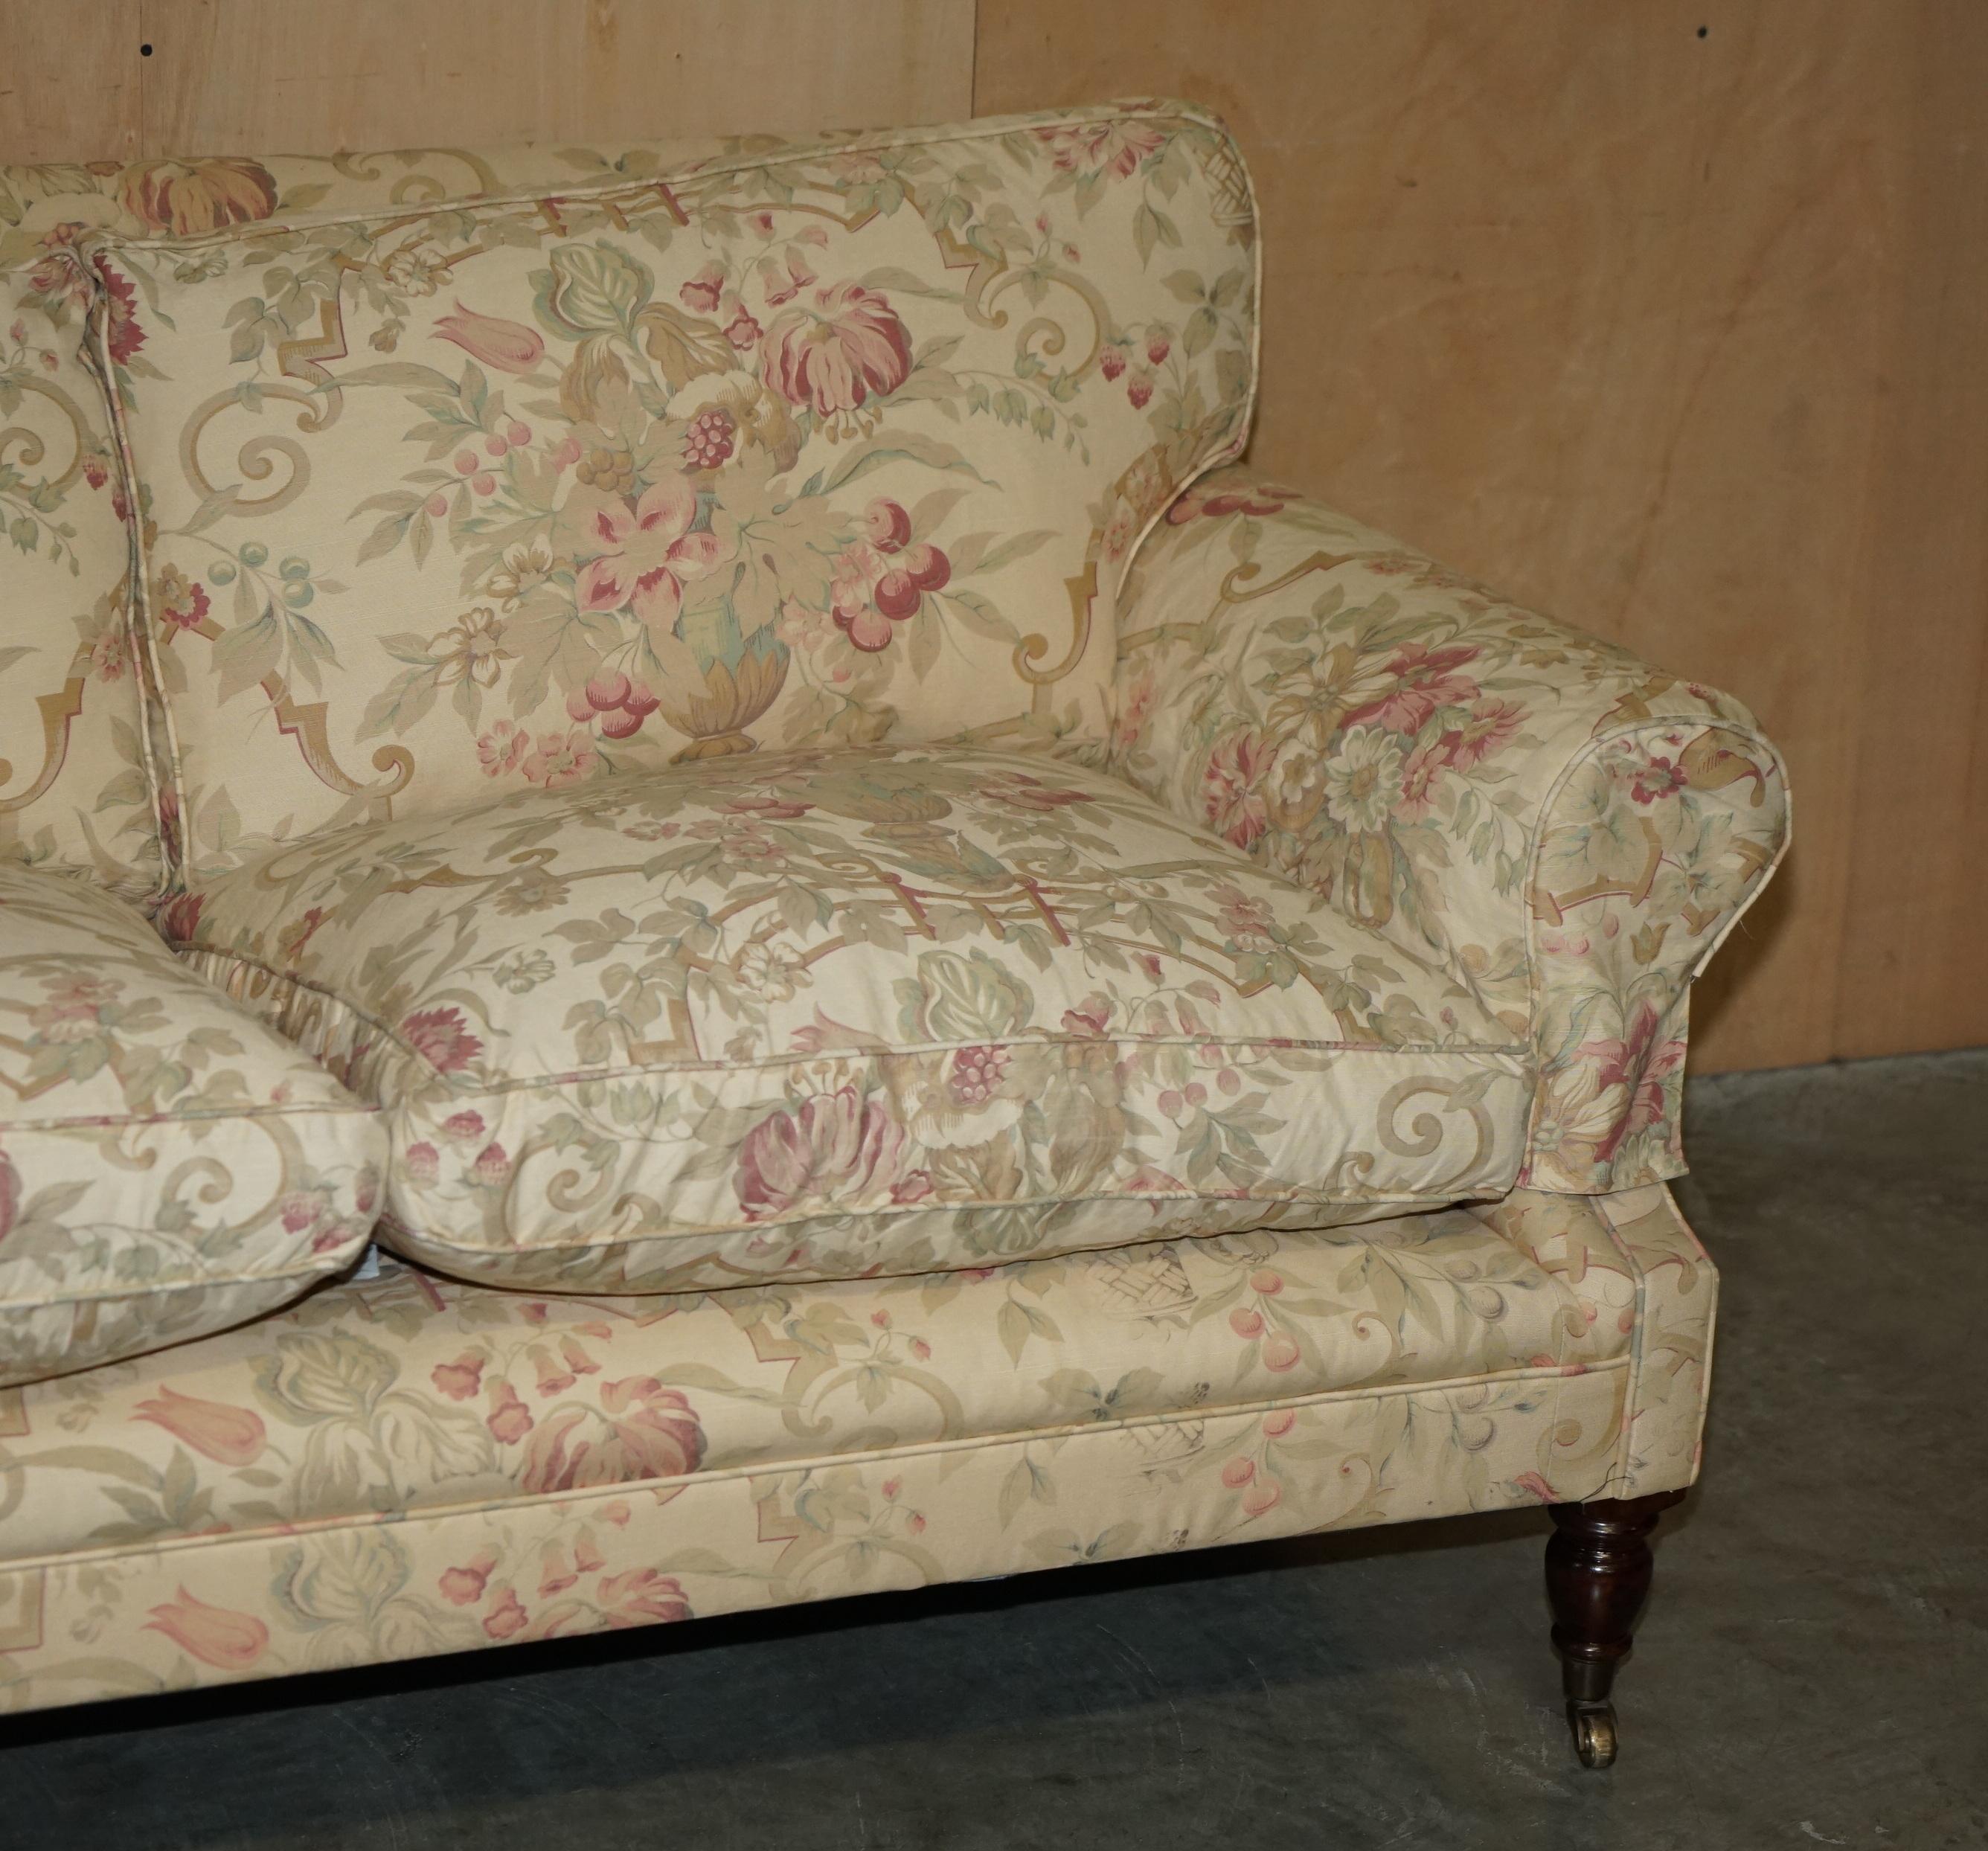 English GEORGE SMITH CHELSEA TWO SEAT SOFA IN ORIGINAL UPHOLSTERY PART SUiTE For Sale